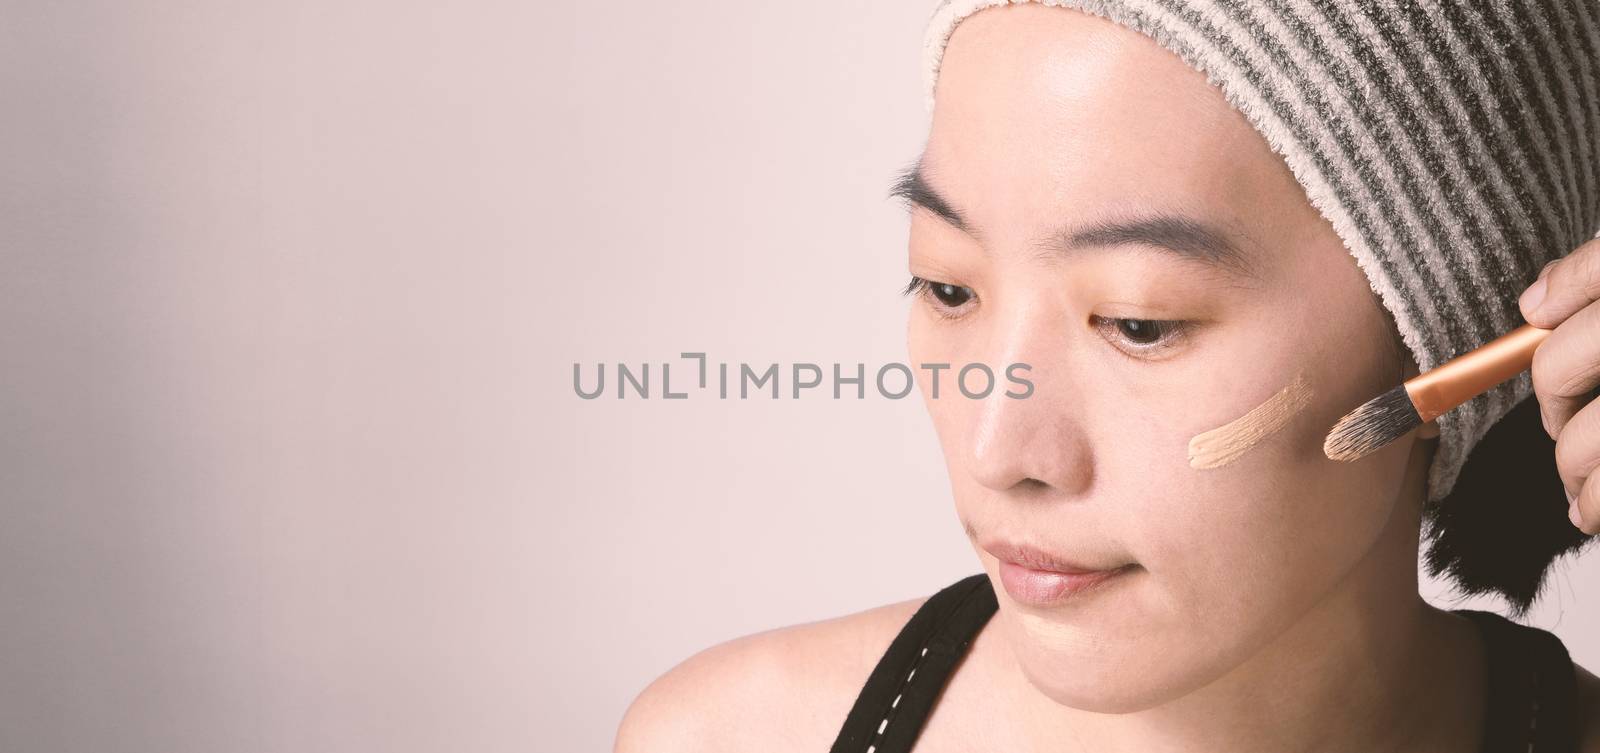 Asian girl or woman 40 years old beautiful face with japanese look making up by foundation liquid and cosmetic brush on sensitive skin for helping her complexion look flawless and no retouch.